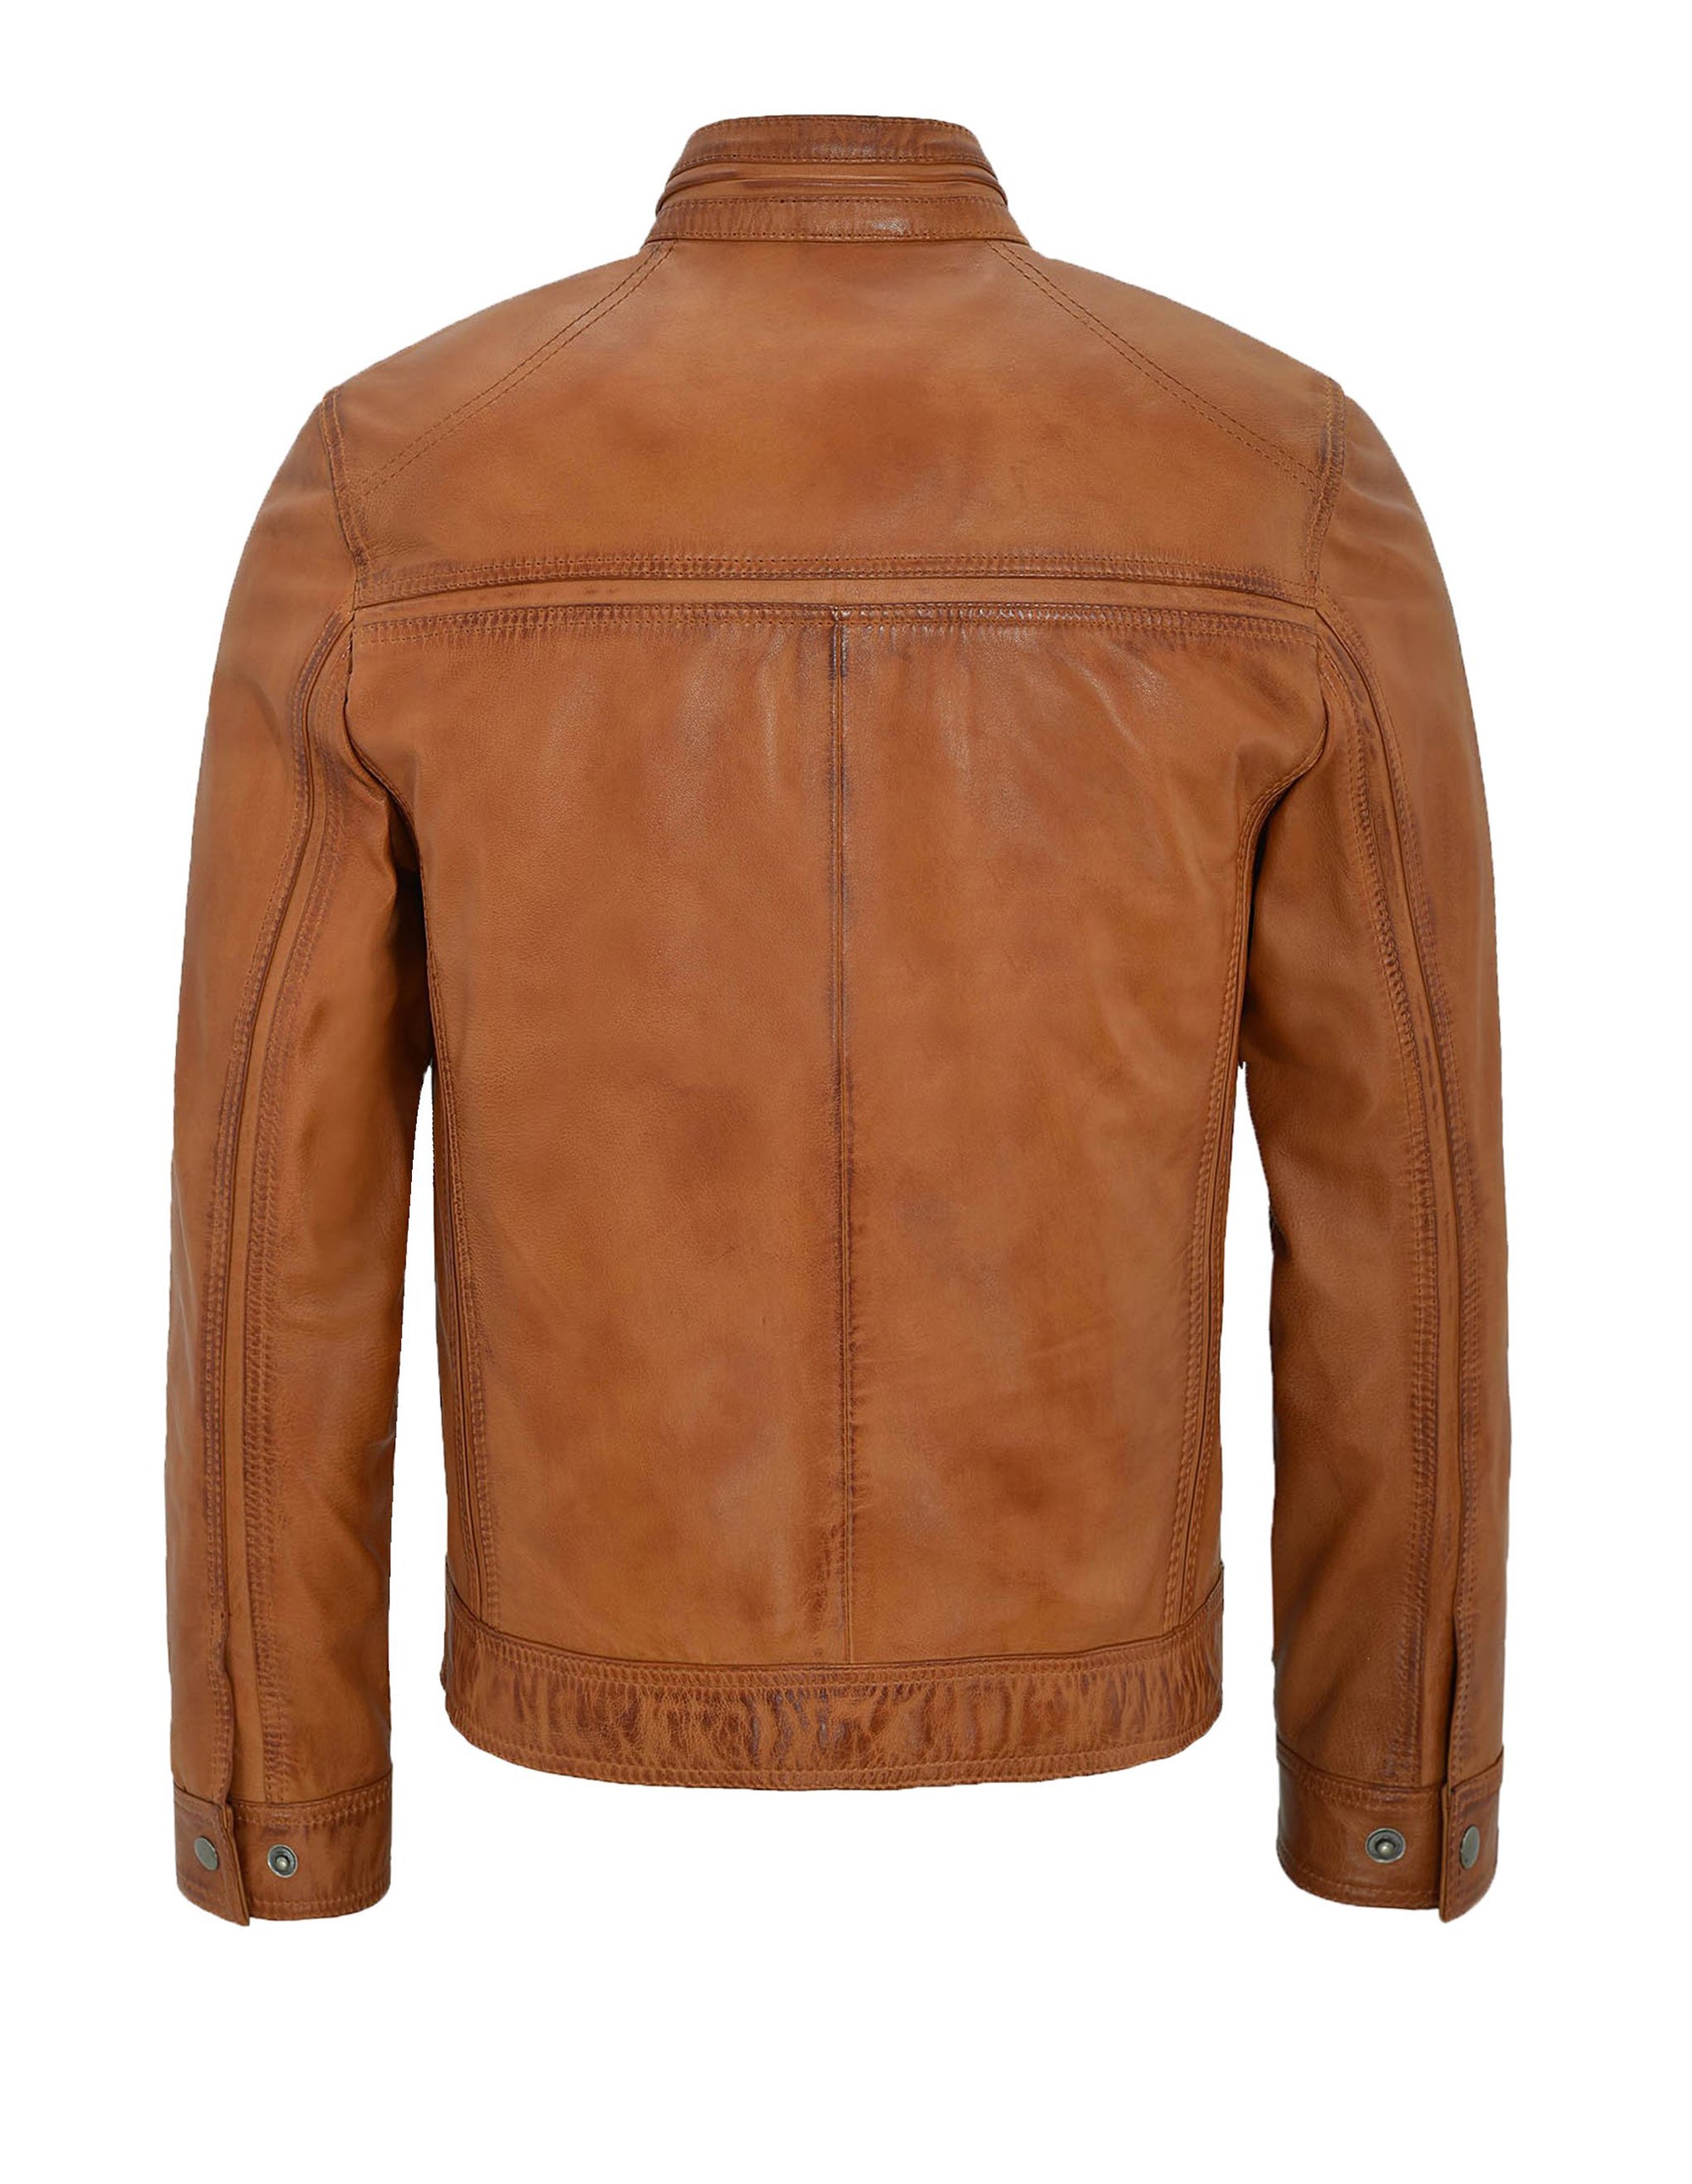 Distressed Tan Leather Motorcycle Jacket For Men